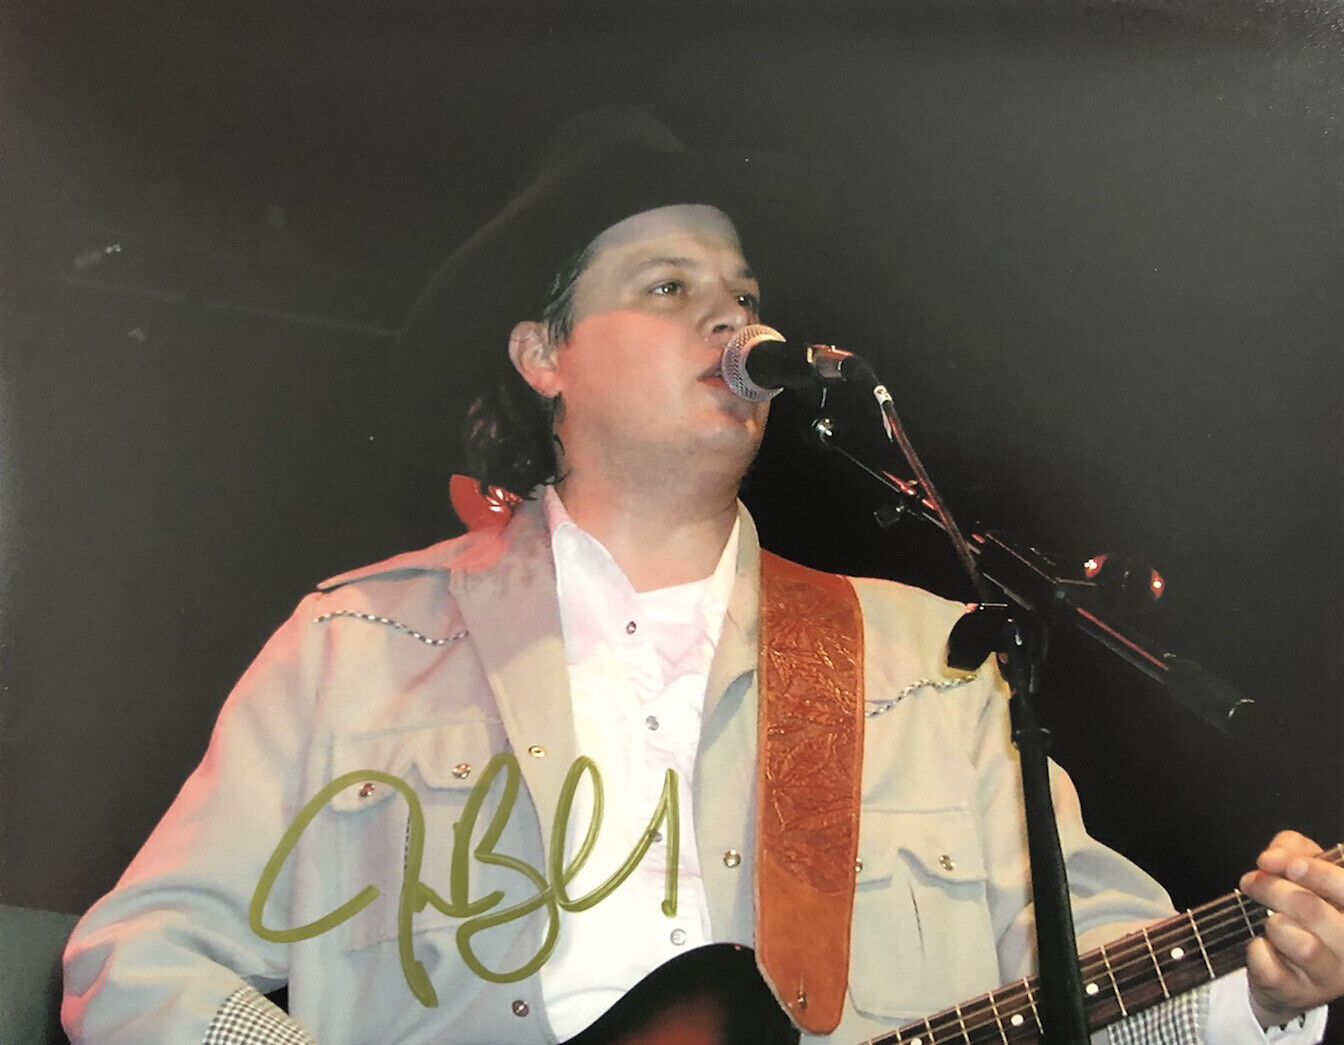 JASON BOLAND HAND SIGNED 8x10 Photo Poster painting COUNTRY SINGER AUTOGRAPH AUTHENTIC COA